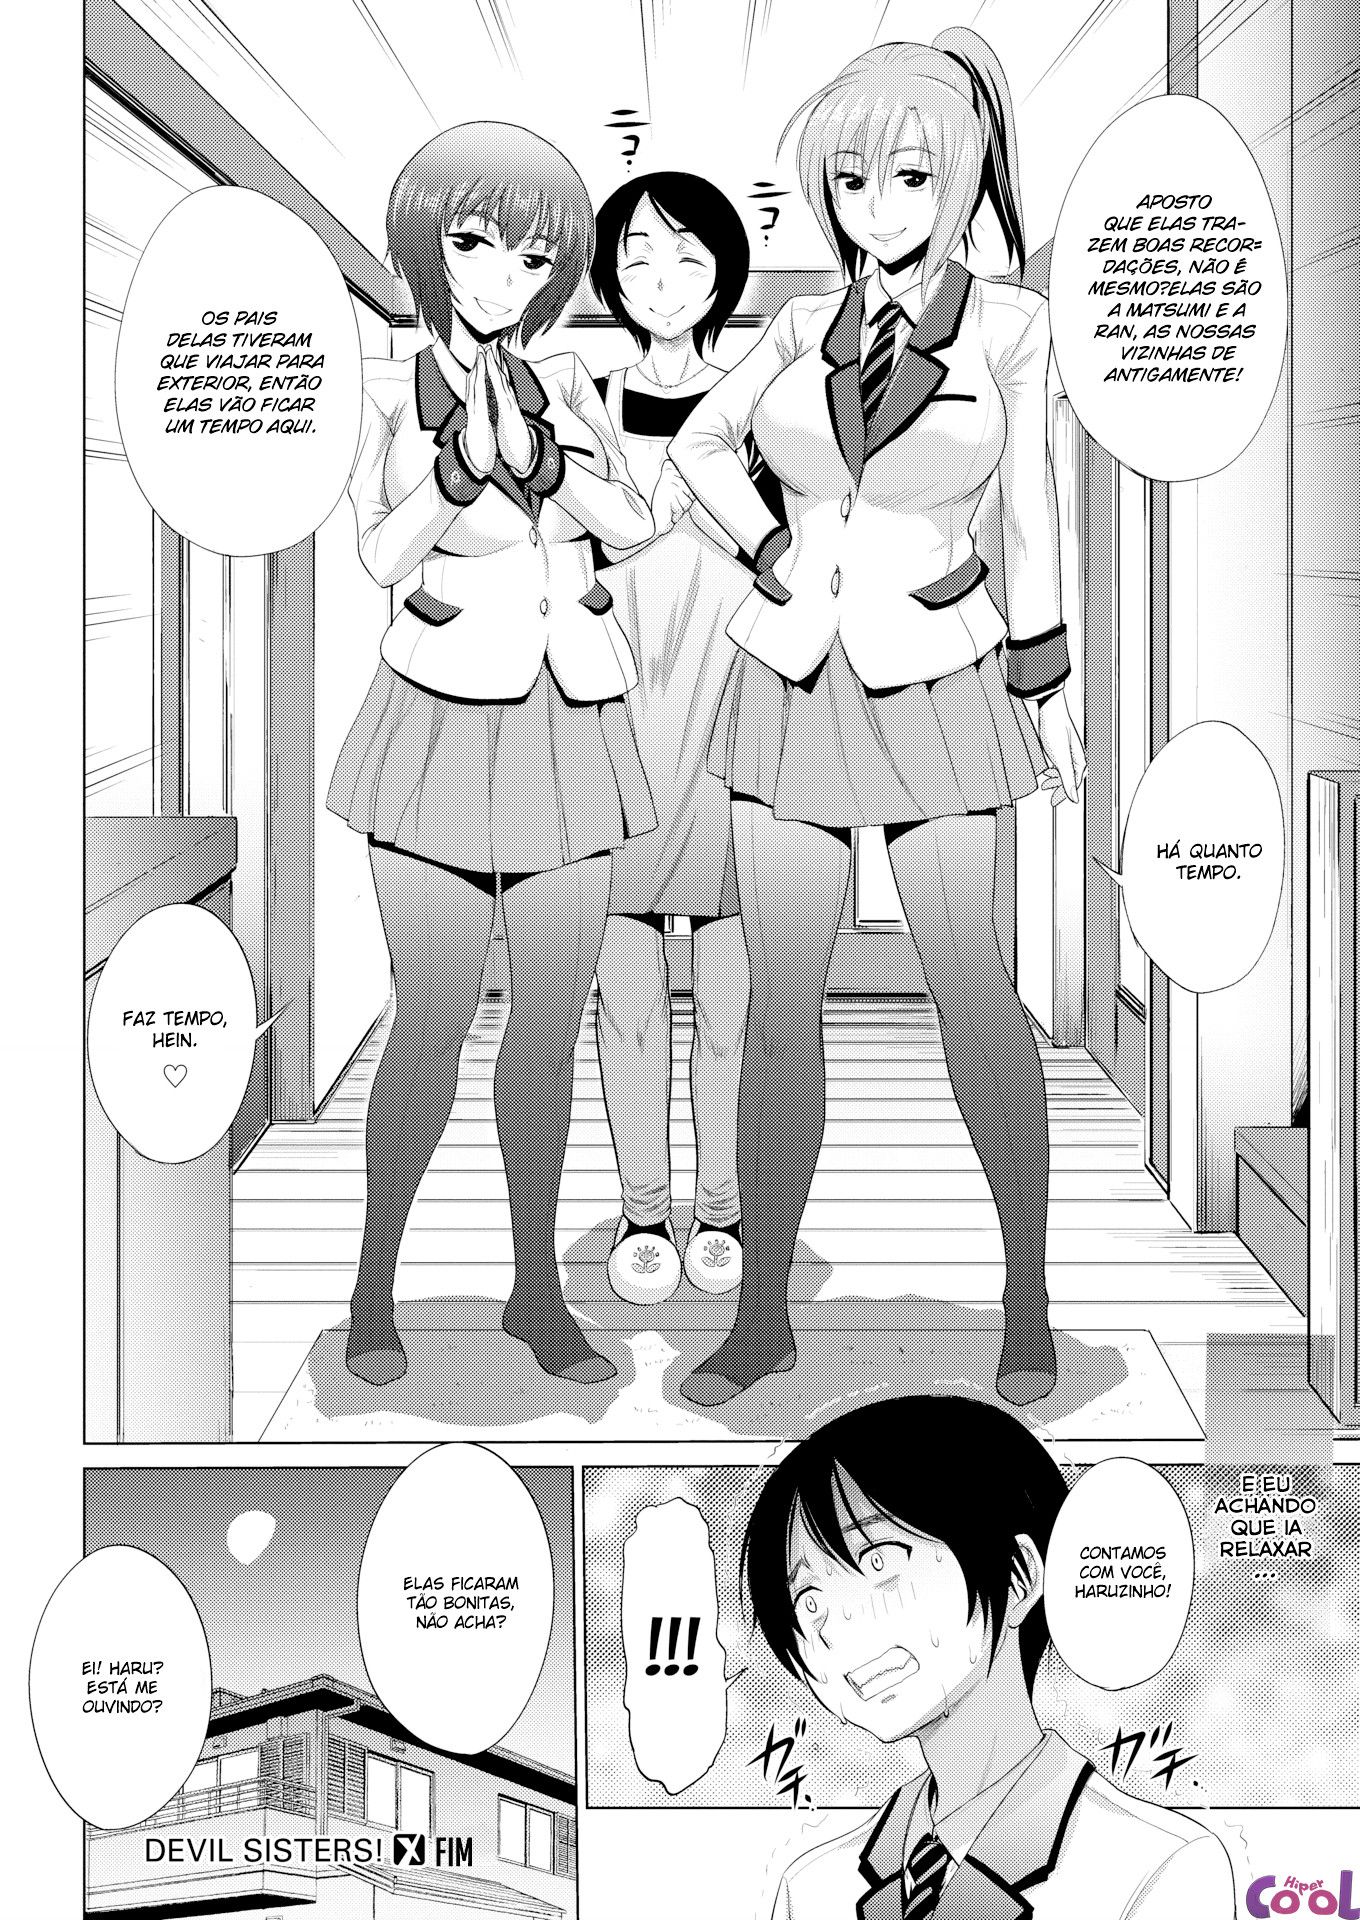 devil-sisters-chapter-01-page-27.jpg